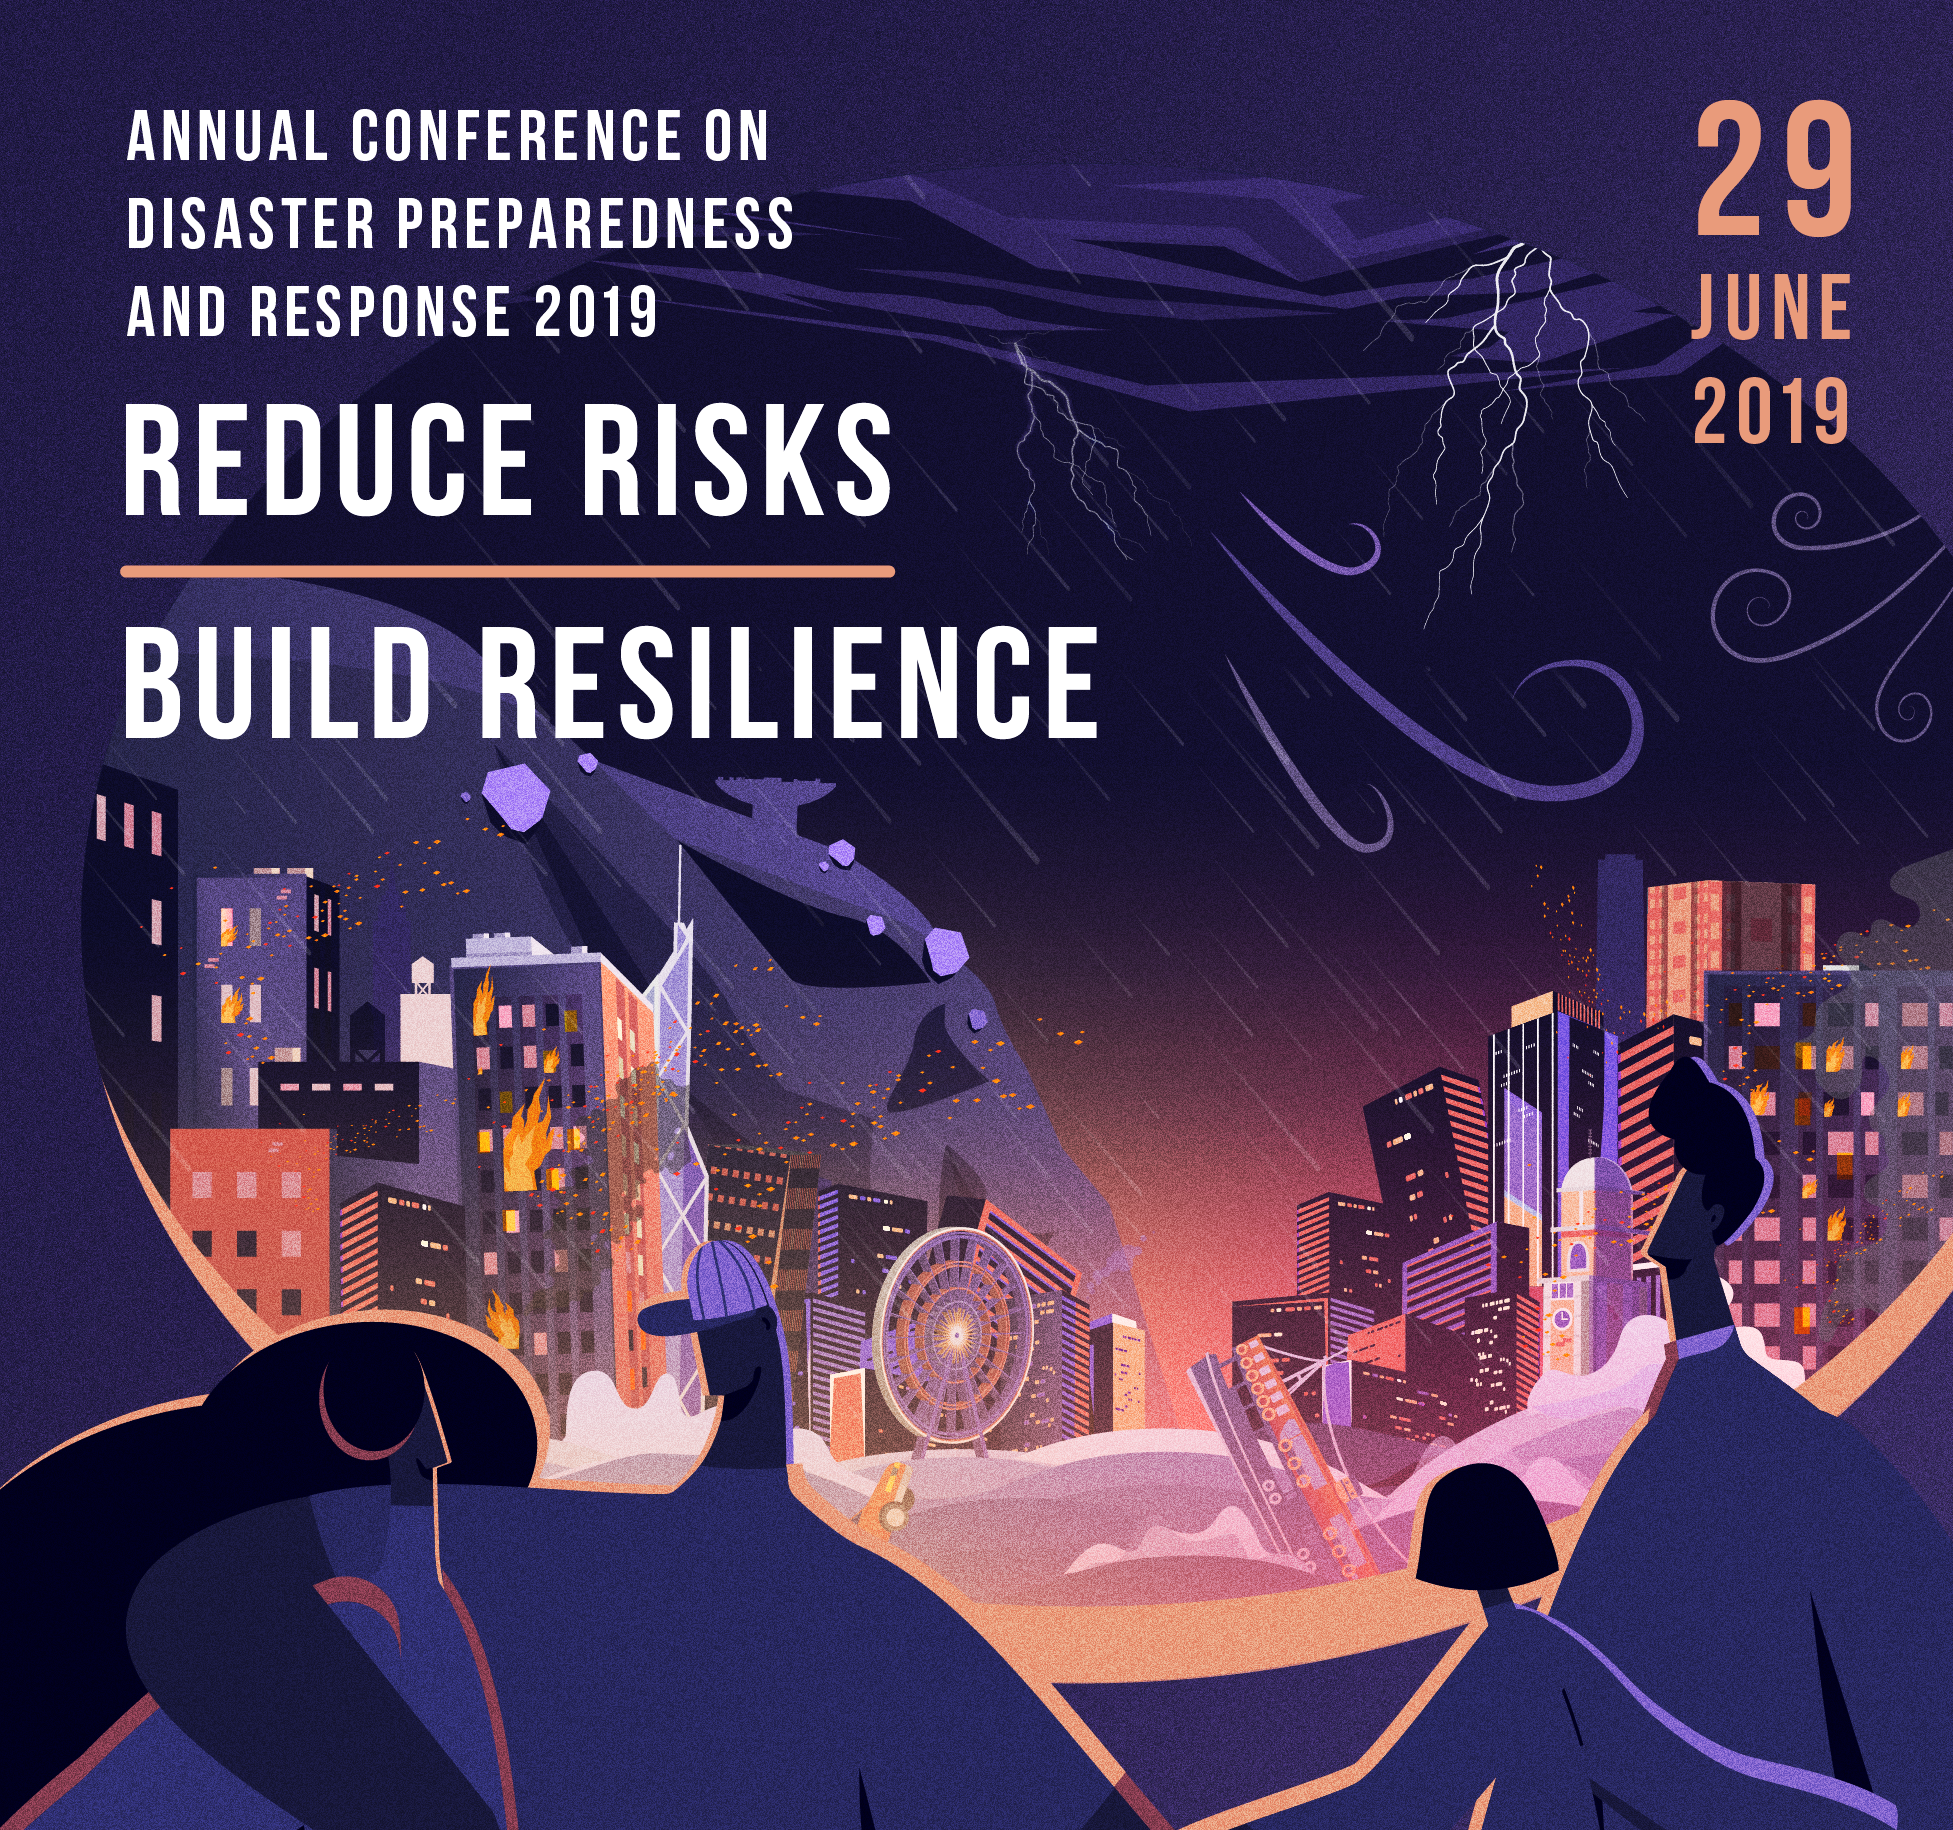 Annual Conference on Disaster Preparedness and Response 2019: Post-Conference Report now published!